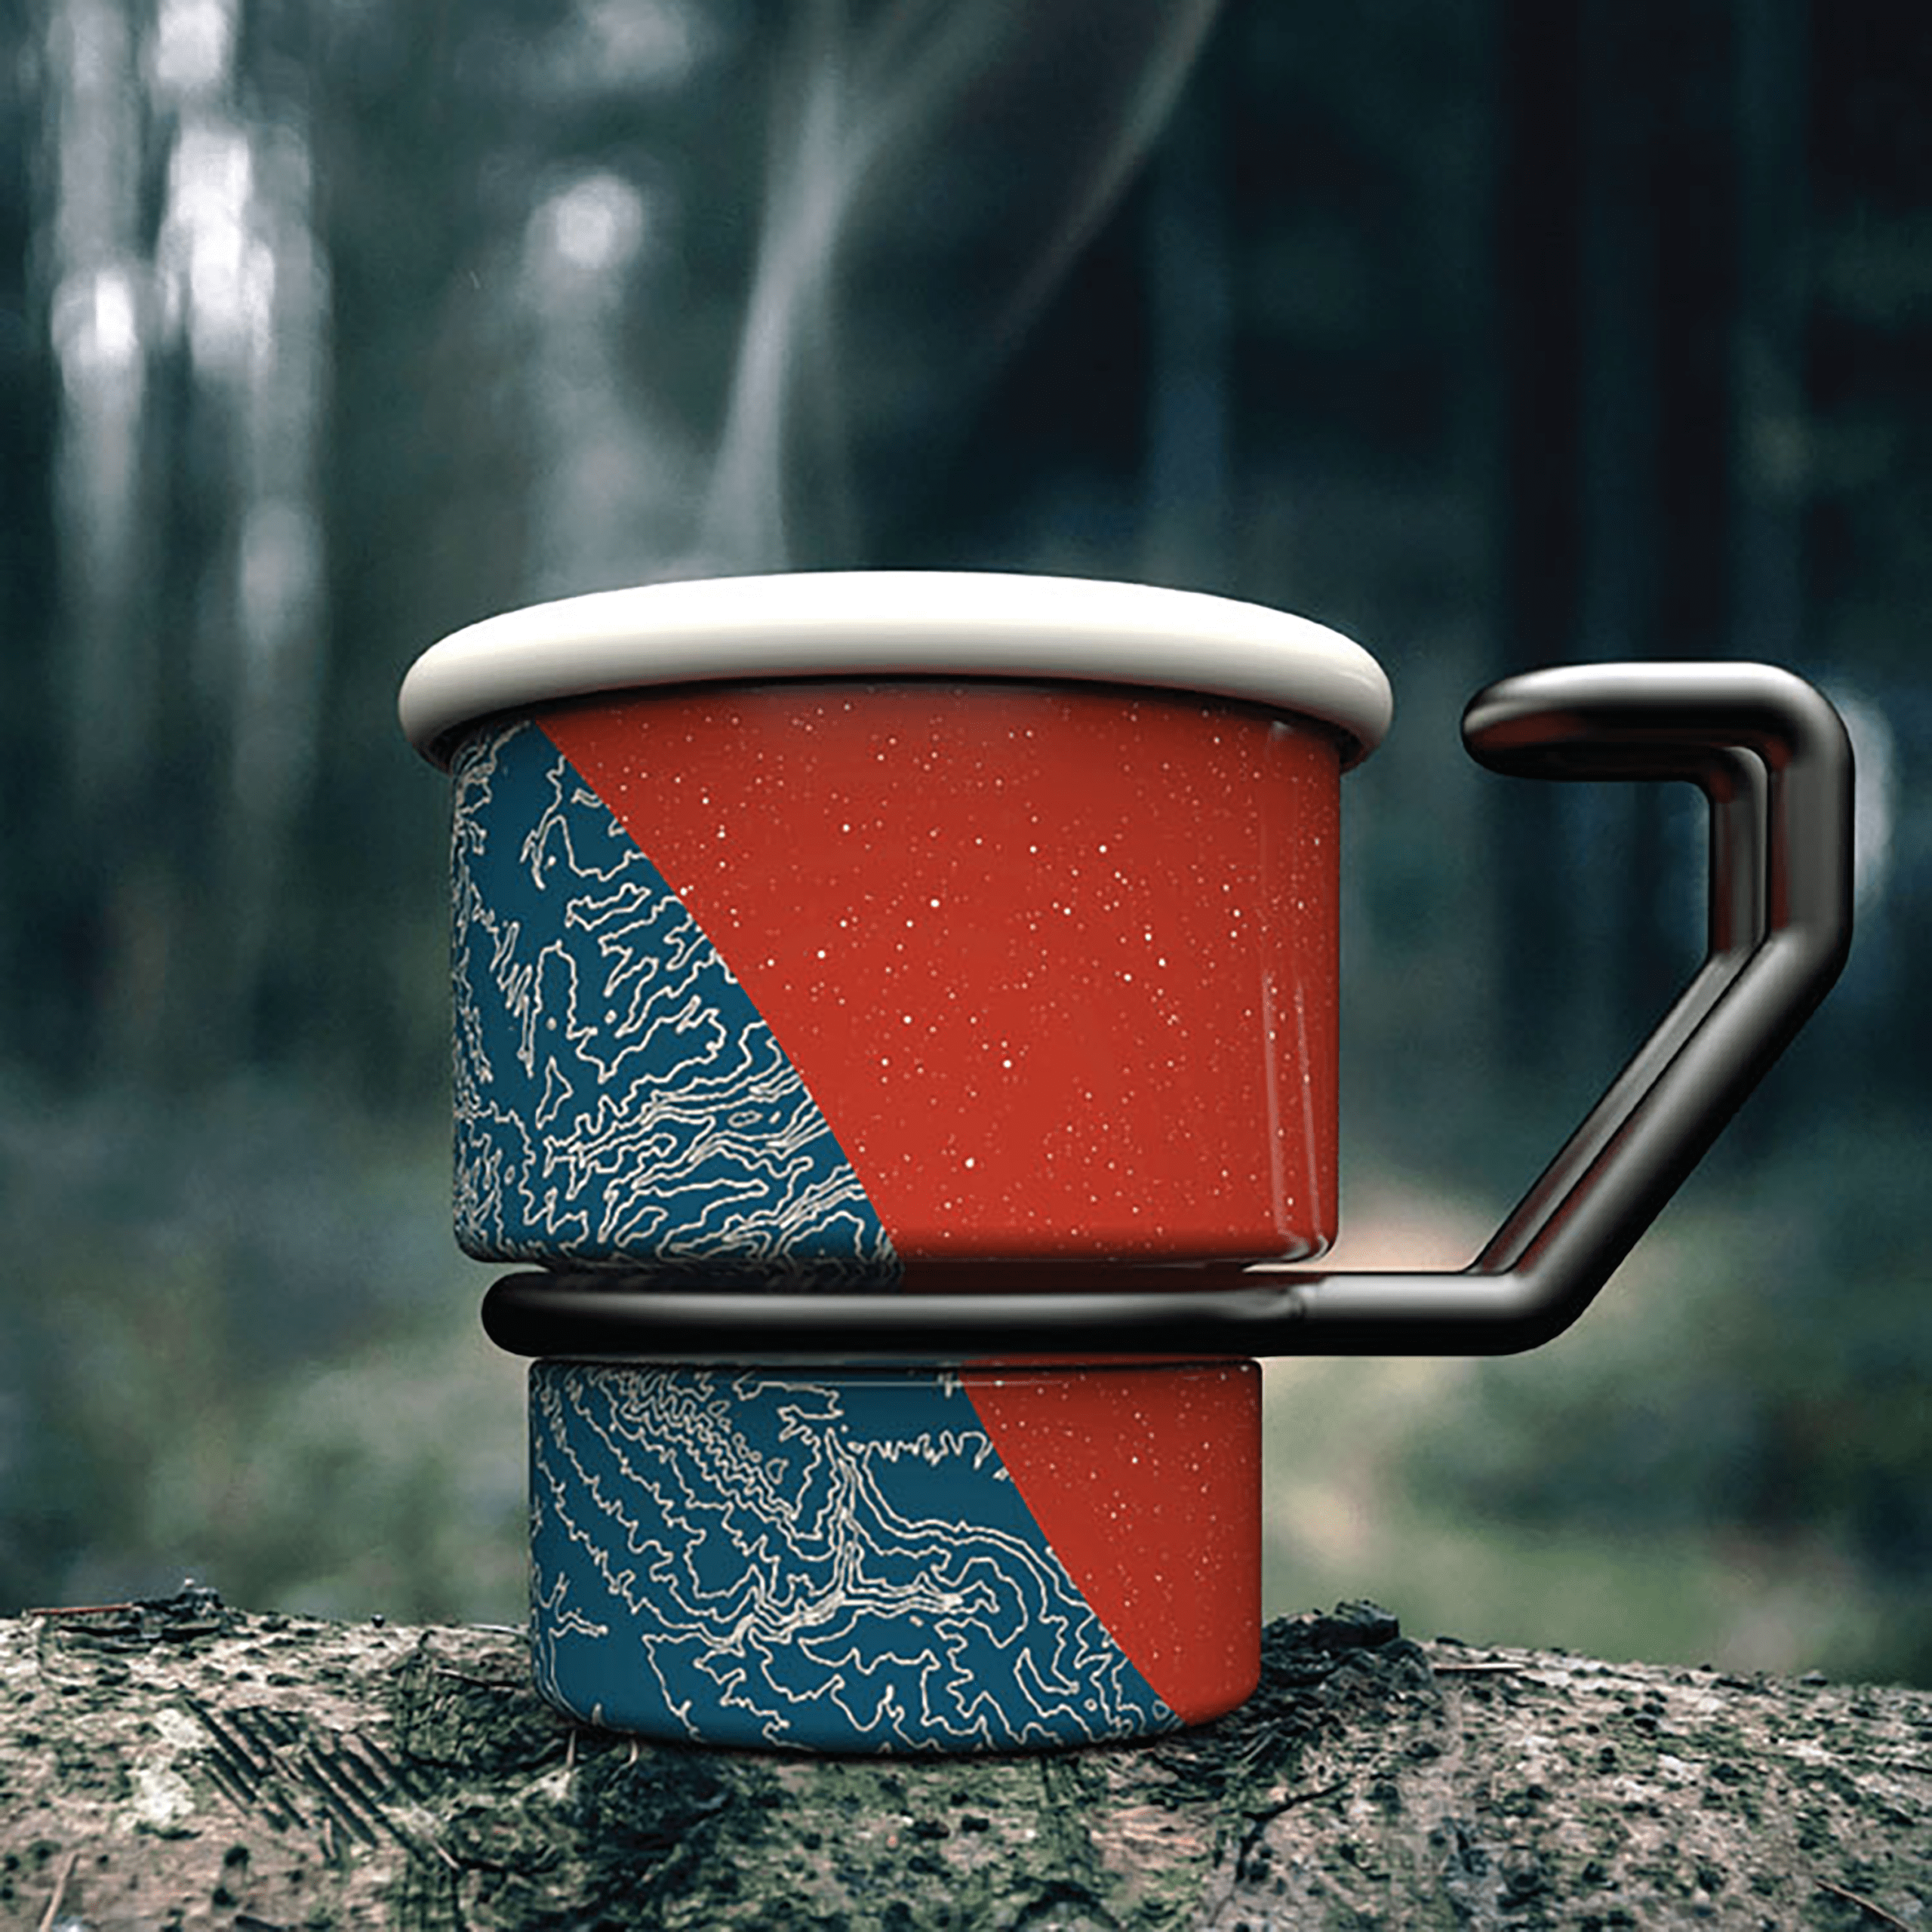 Image of a short travel mug pictured sitting on a rock with a forest in the background. The mug is half red with white speckles, and half blue with white swirls. It also has a whire rim and a black curved handle.